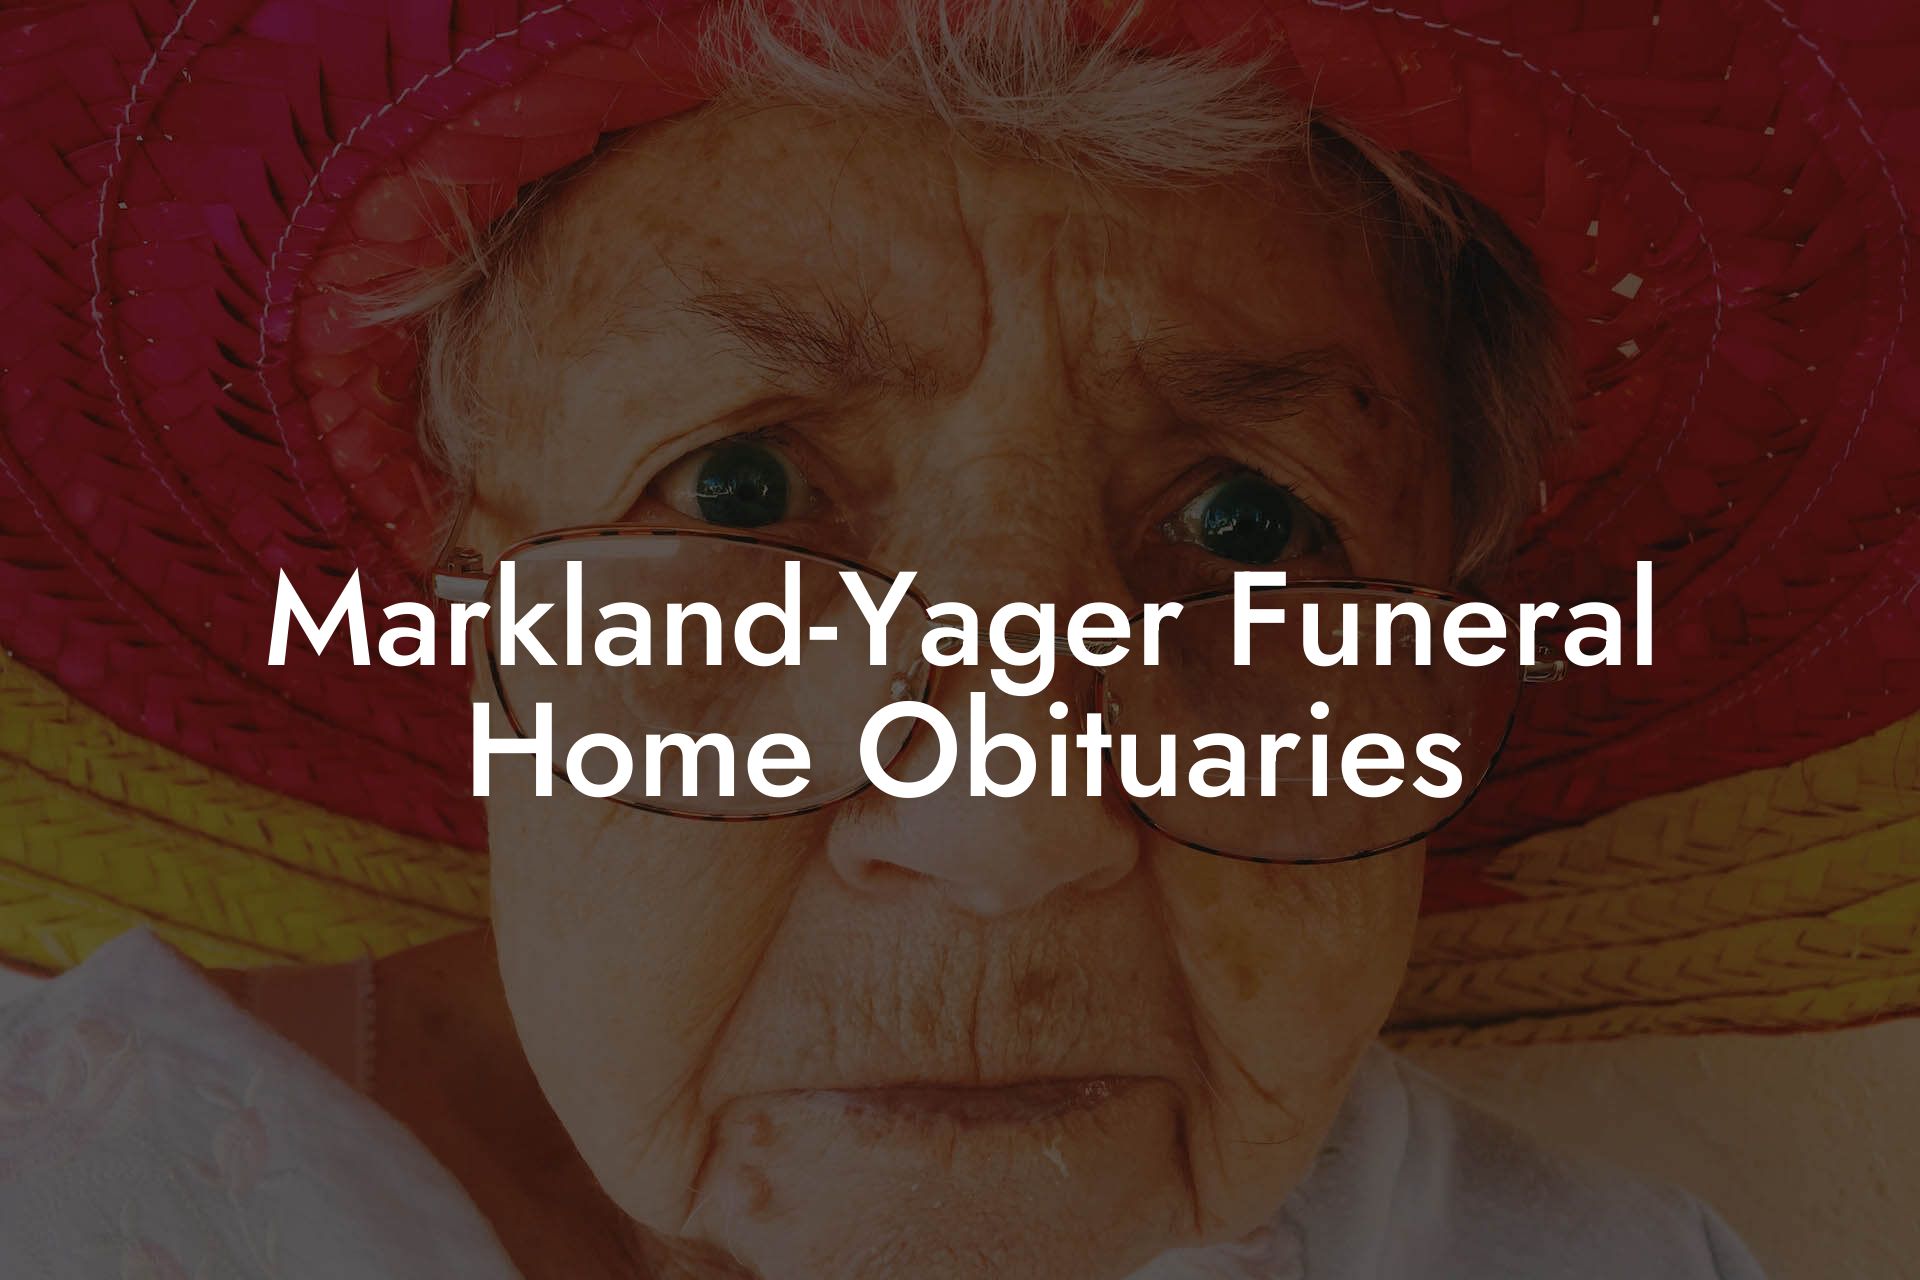 Markland-Yager Funeral Home Obituaries